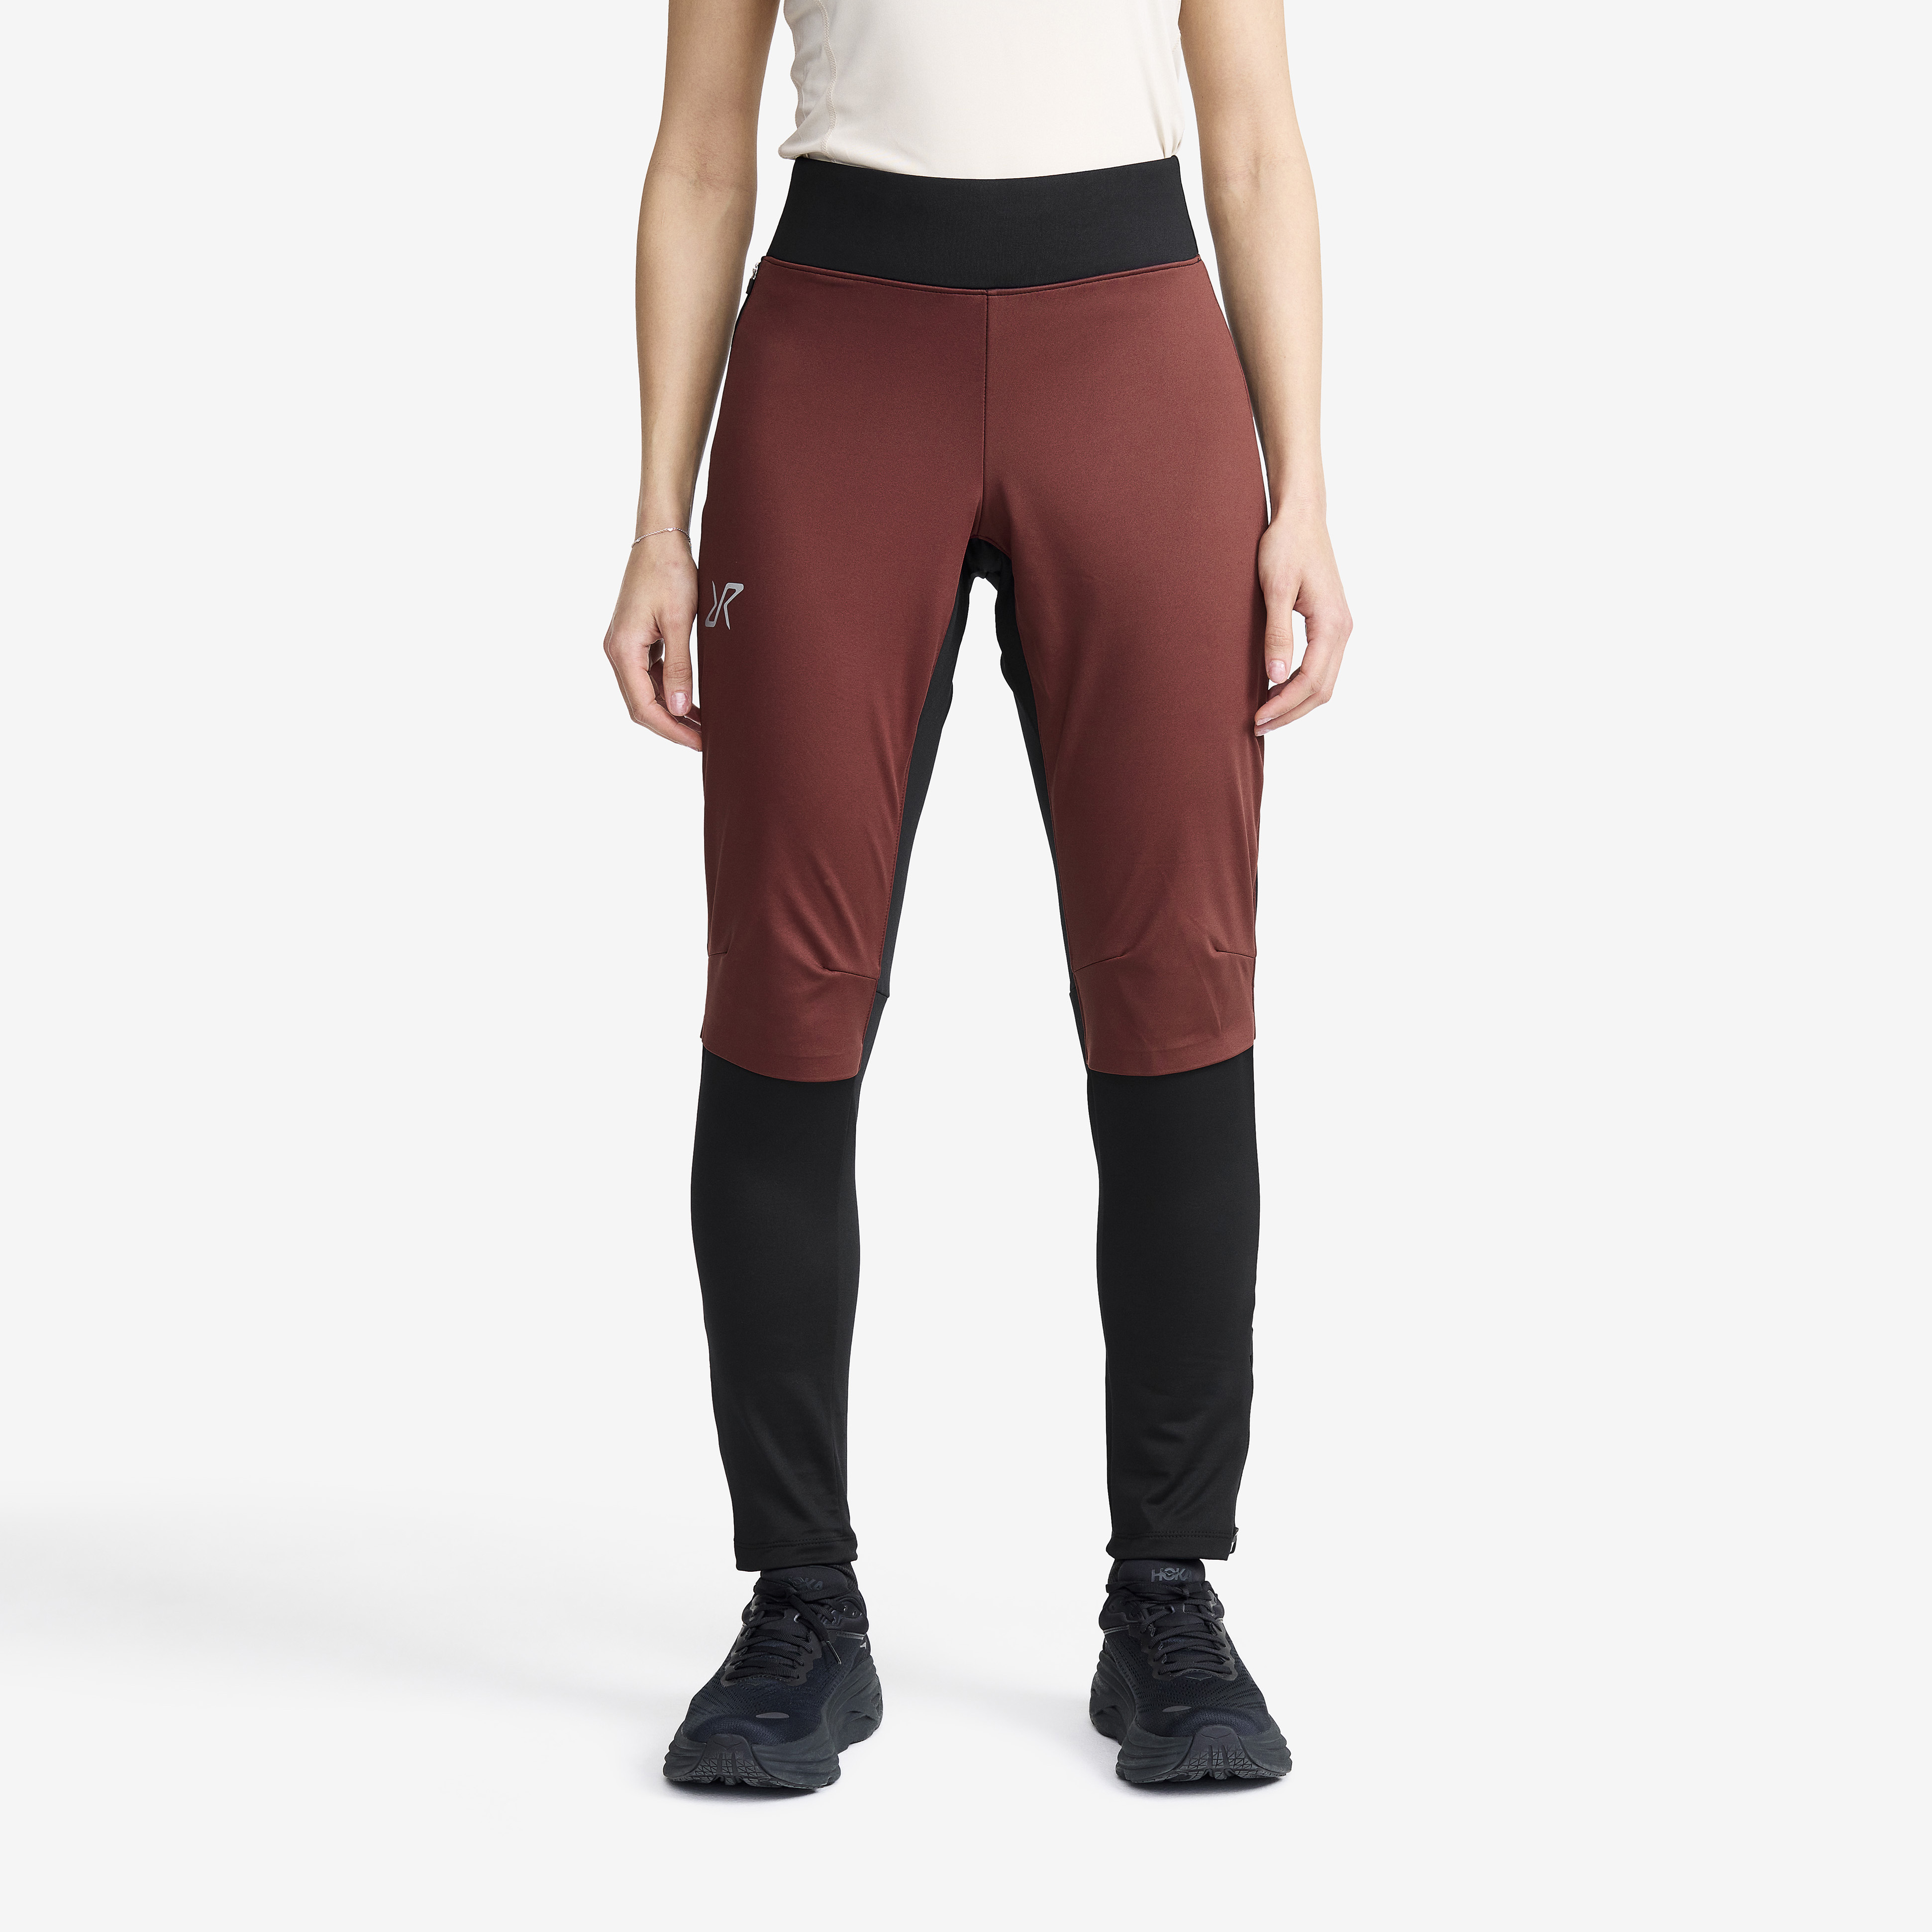 Pace Wind Tights Andorra Mujeres